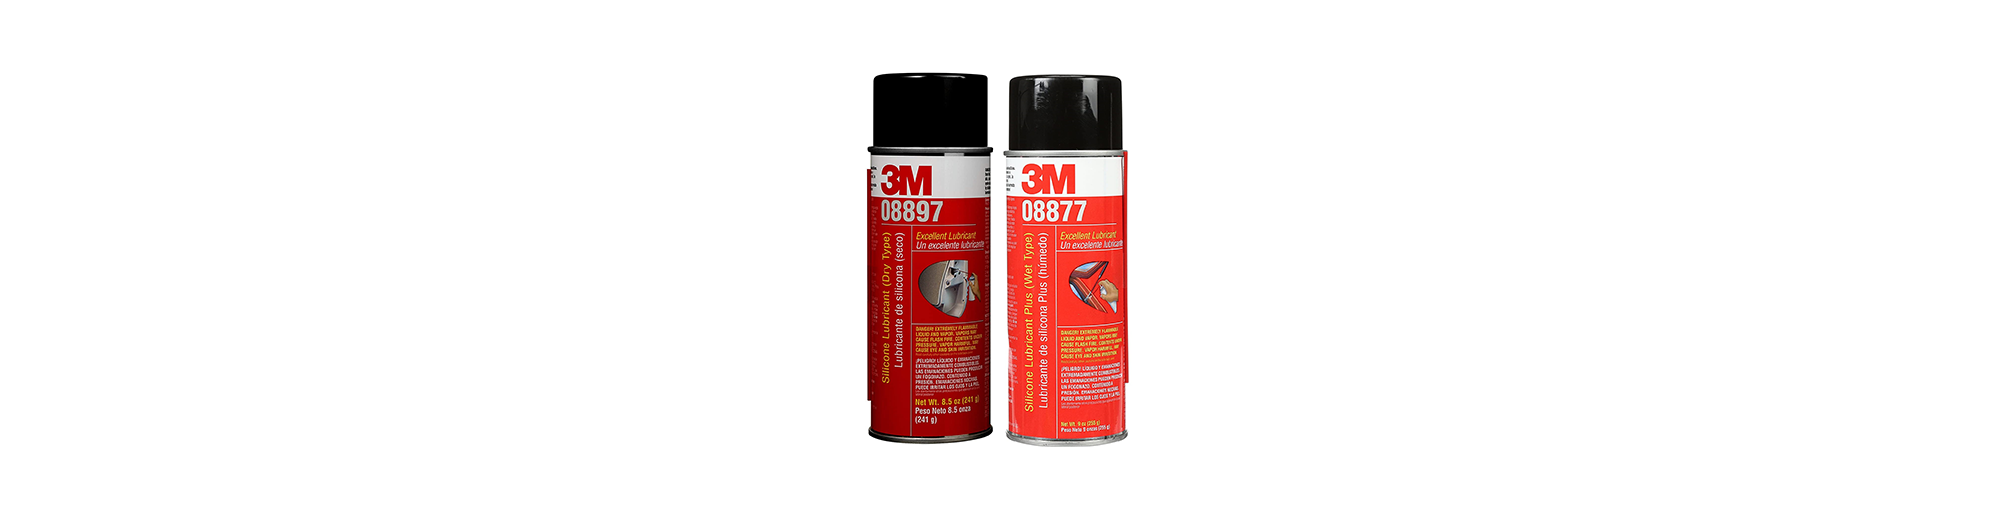 3M Silicone Lubricant Plus (Wet TYPE)